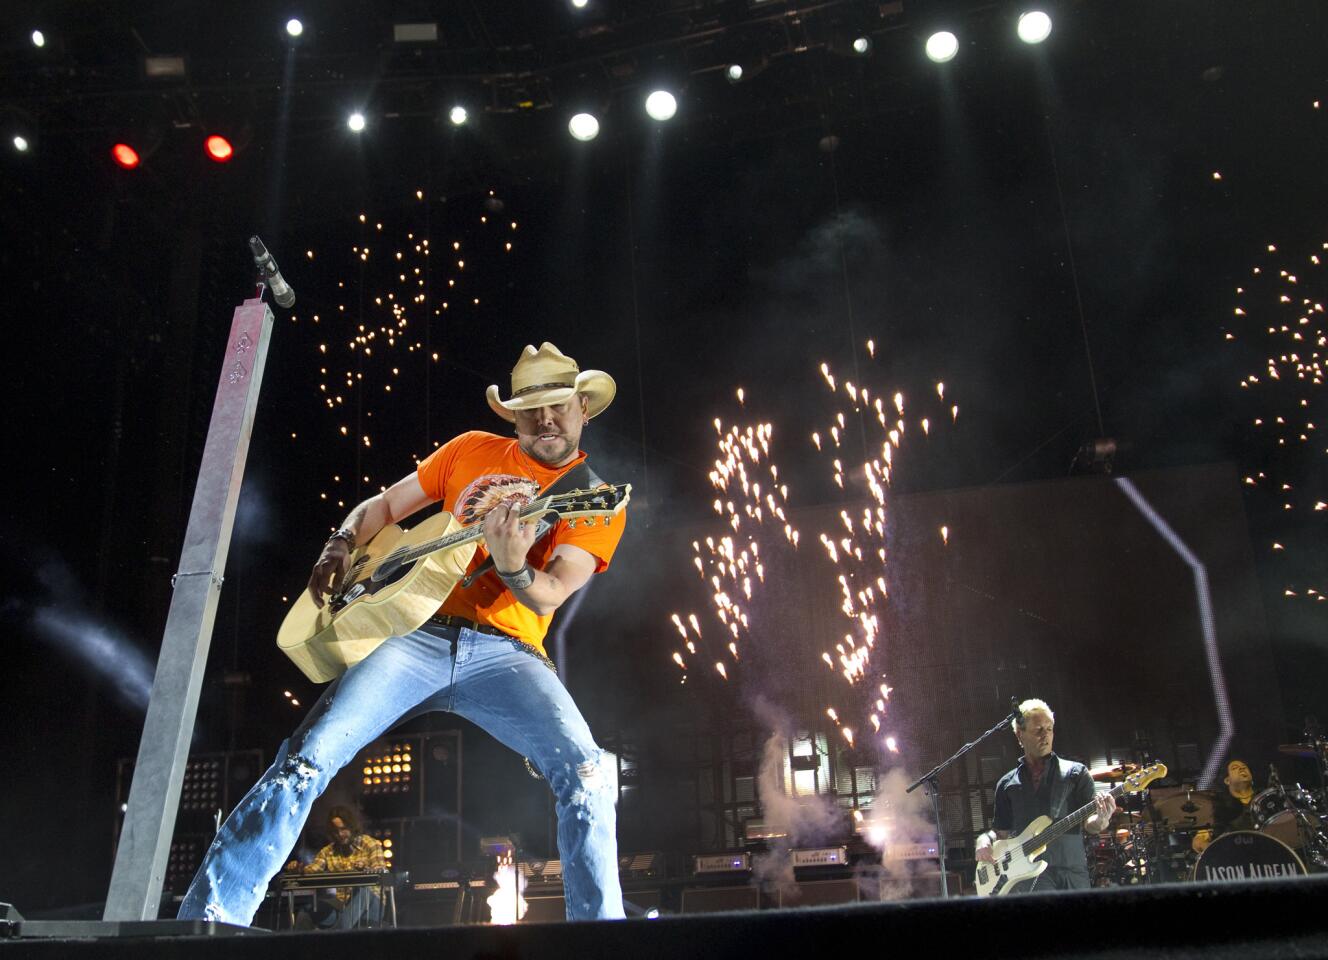 Jason Aldean performs as he headlines Day 2 of the three-day Stagecoach Country Music Festival in Indio.